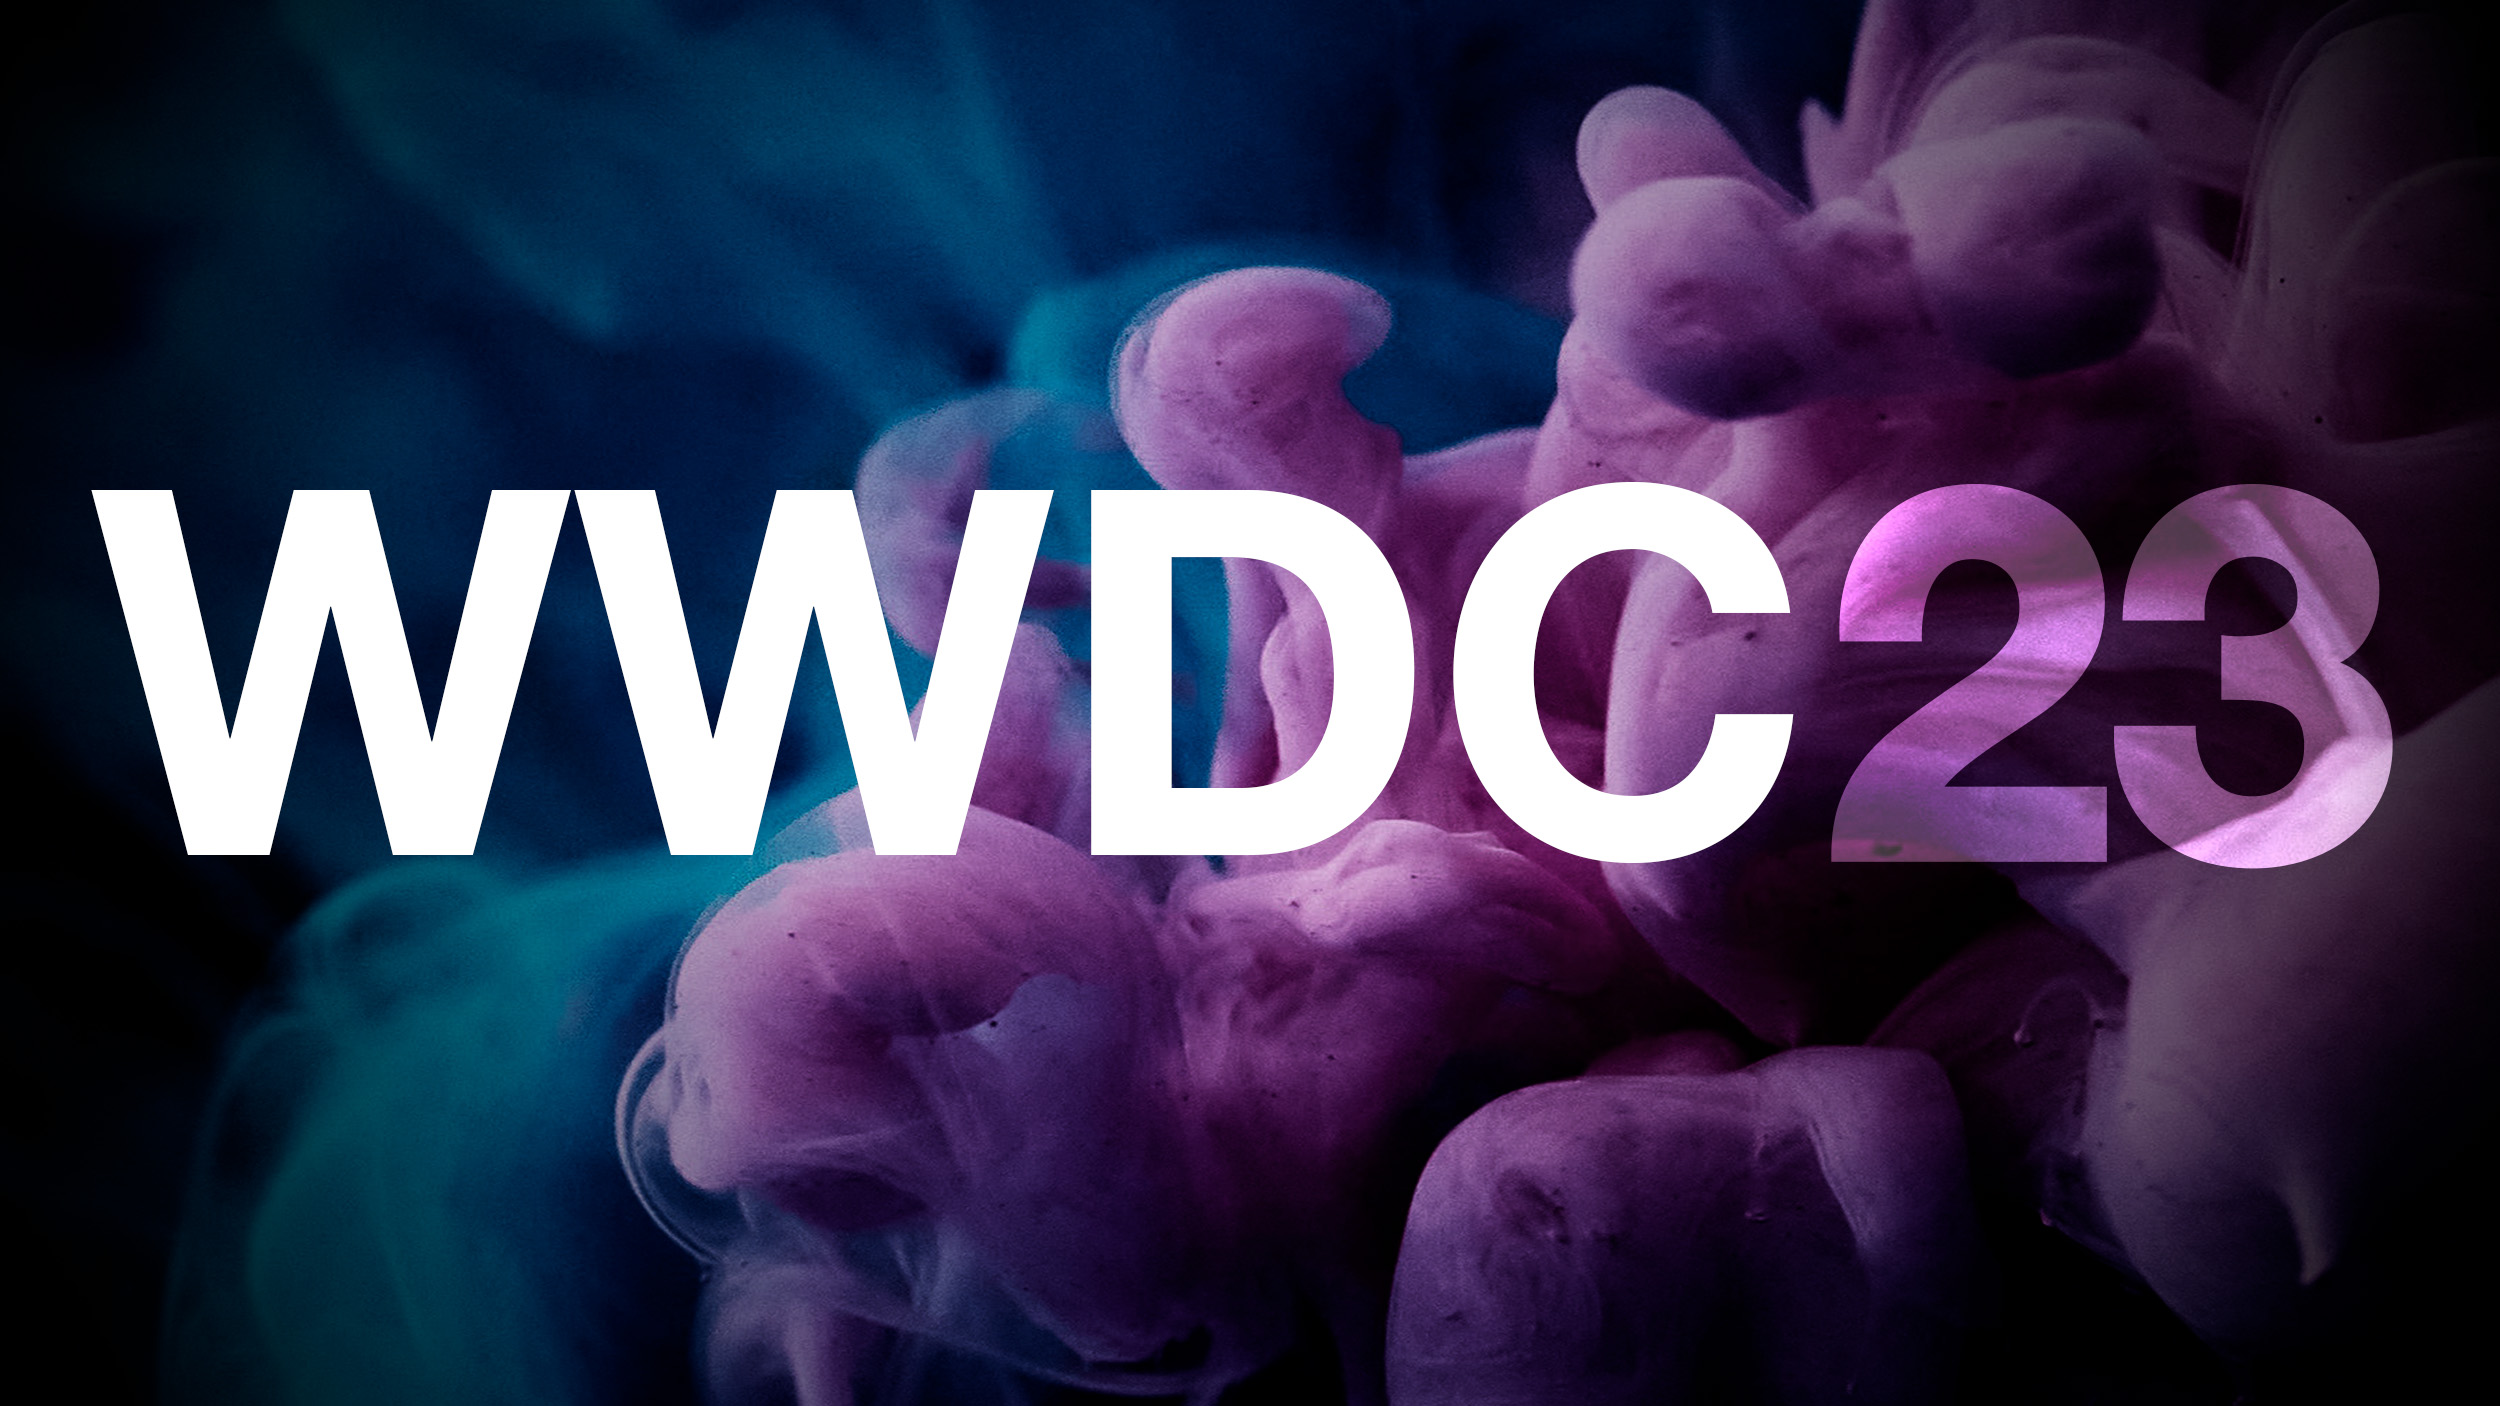 WWDC23 Overview: